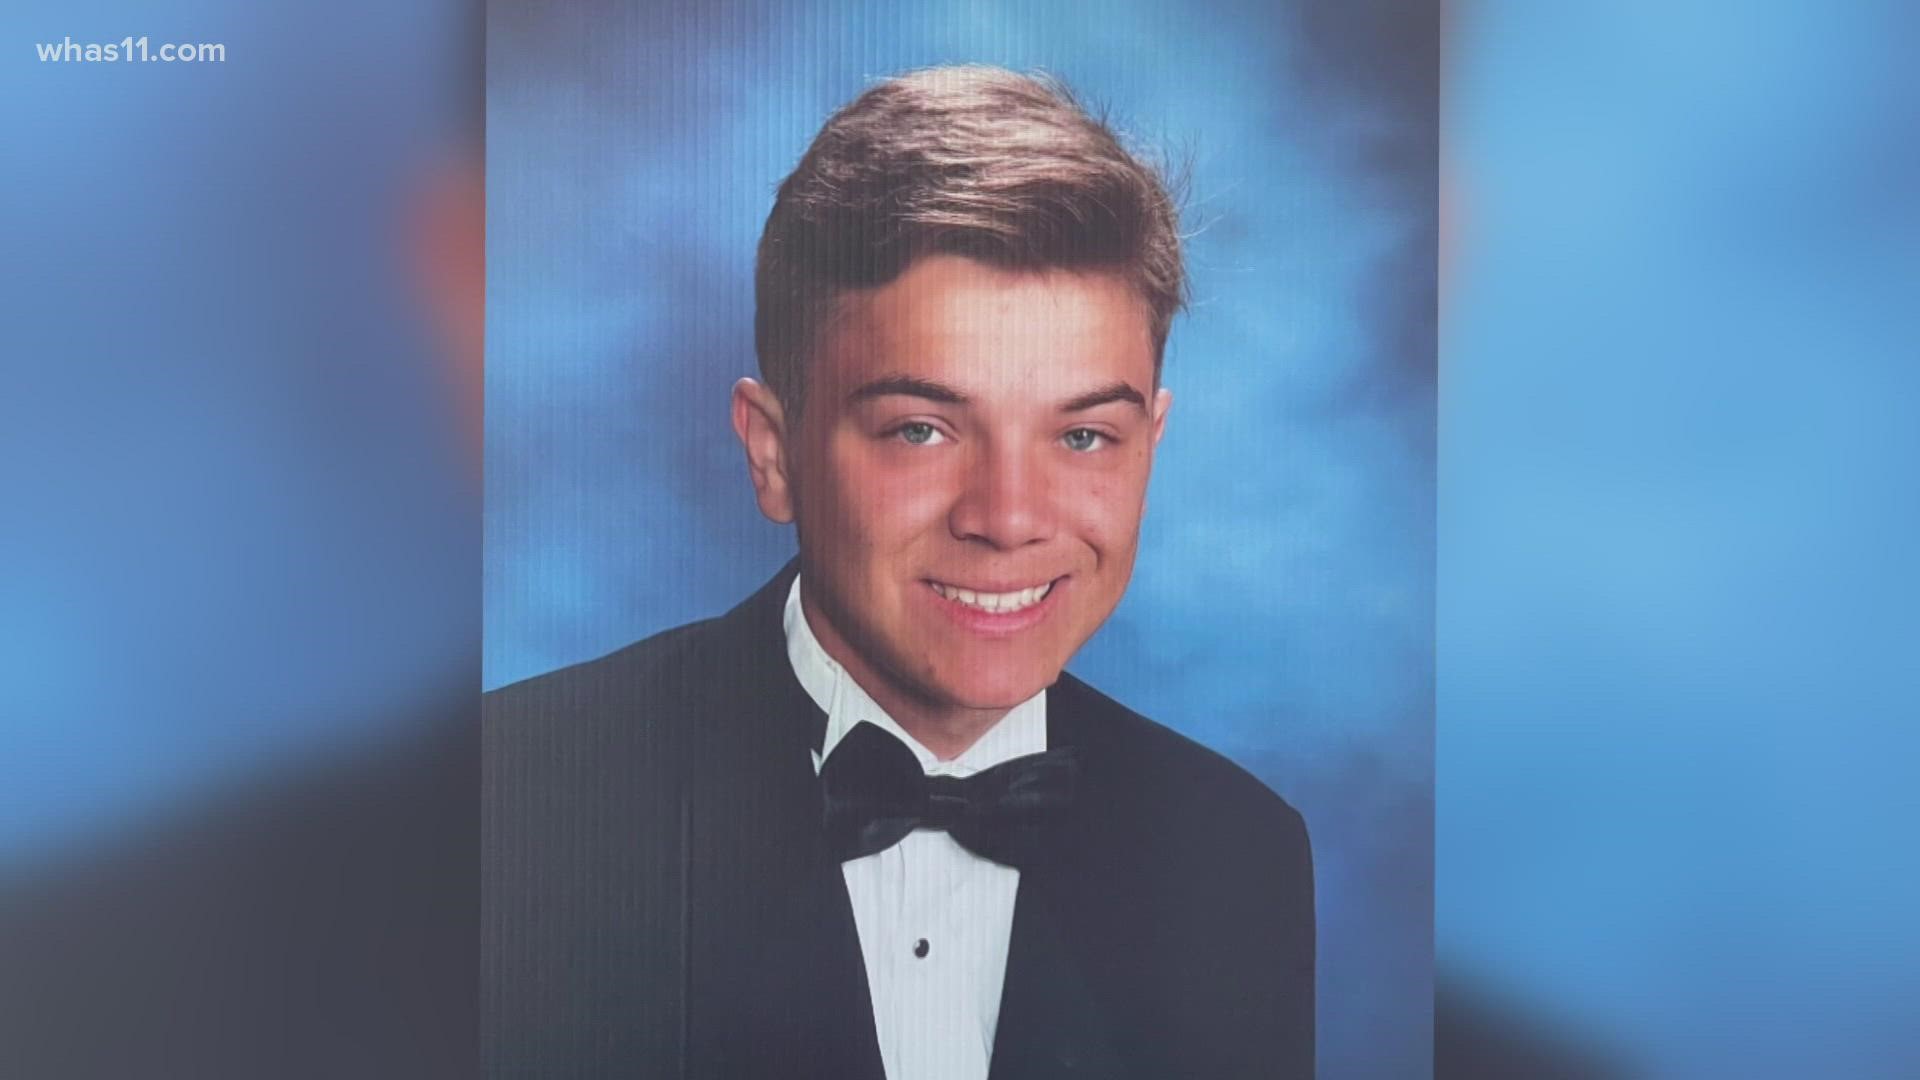 The body of 20-year-old Travis Haley was discovered Sunday near his wrecked vehicle, days after police said they searched the area thoroughly.